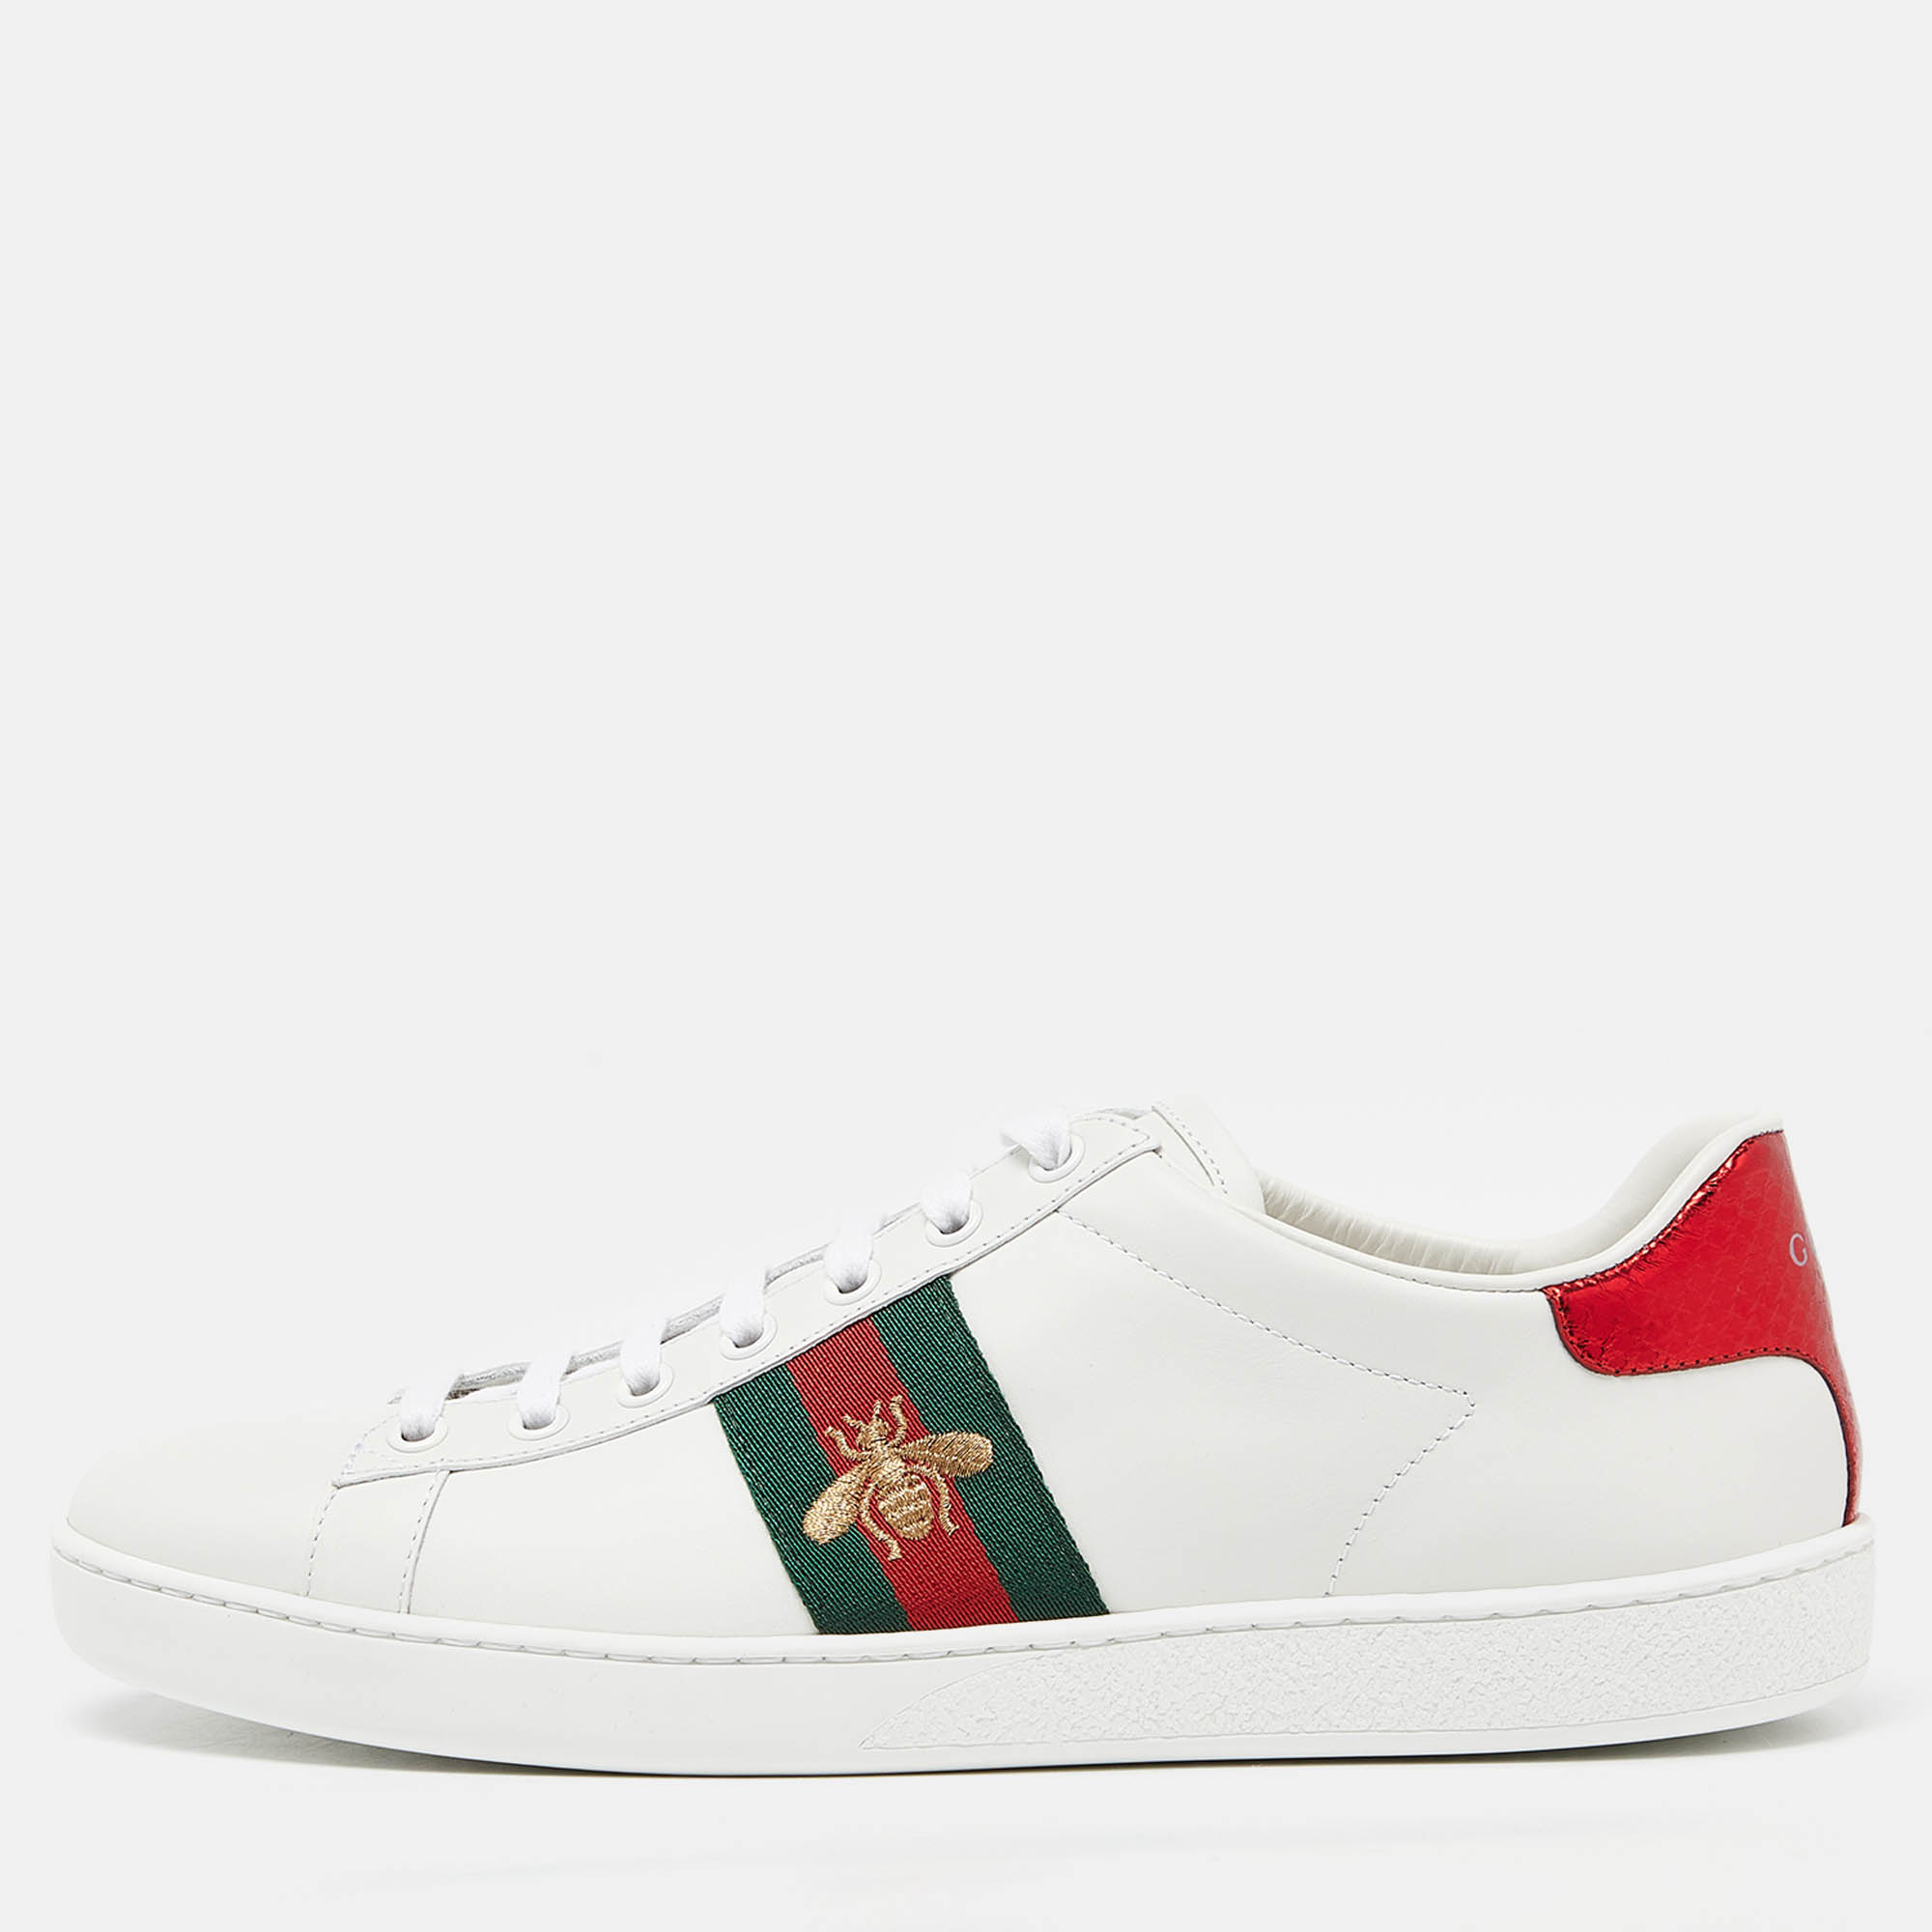 Gucci white leather web detail bee embroidered ace low top sneakers size 40